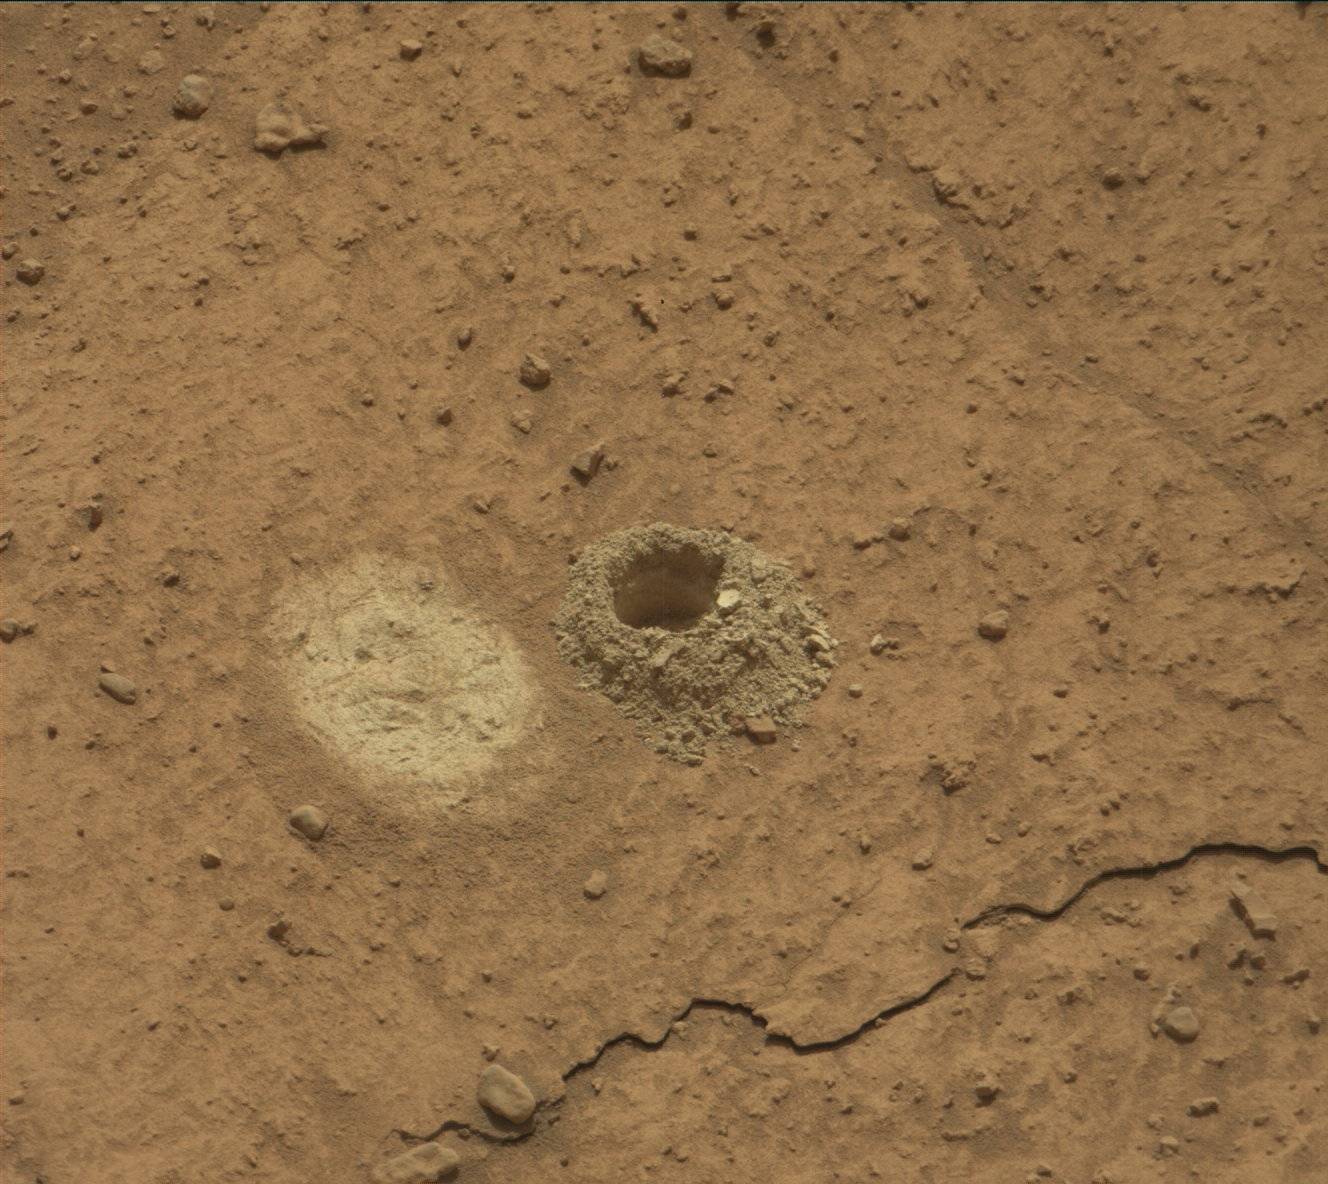 A patch of dry, hard, barren, orange-tan ground fills the frame, with a pronounced crack in the ground running from the lower-right to the bottom-center of the frame. In the middle is an oval patch in light tan, where the top soil has been scraped away, and to its right is a small hole in the ground looking like a tiny crater, with soil dug out of the hole crating a sloped wall around its edges.